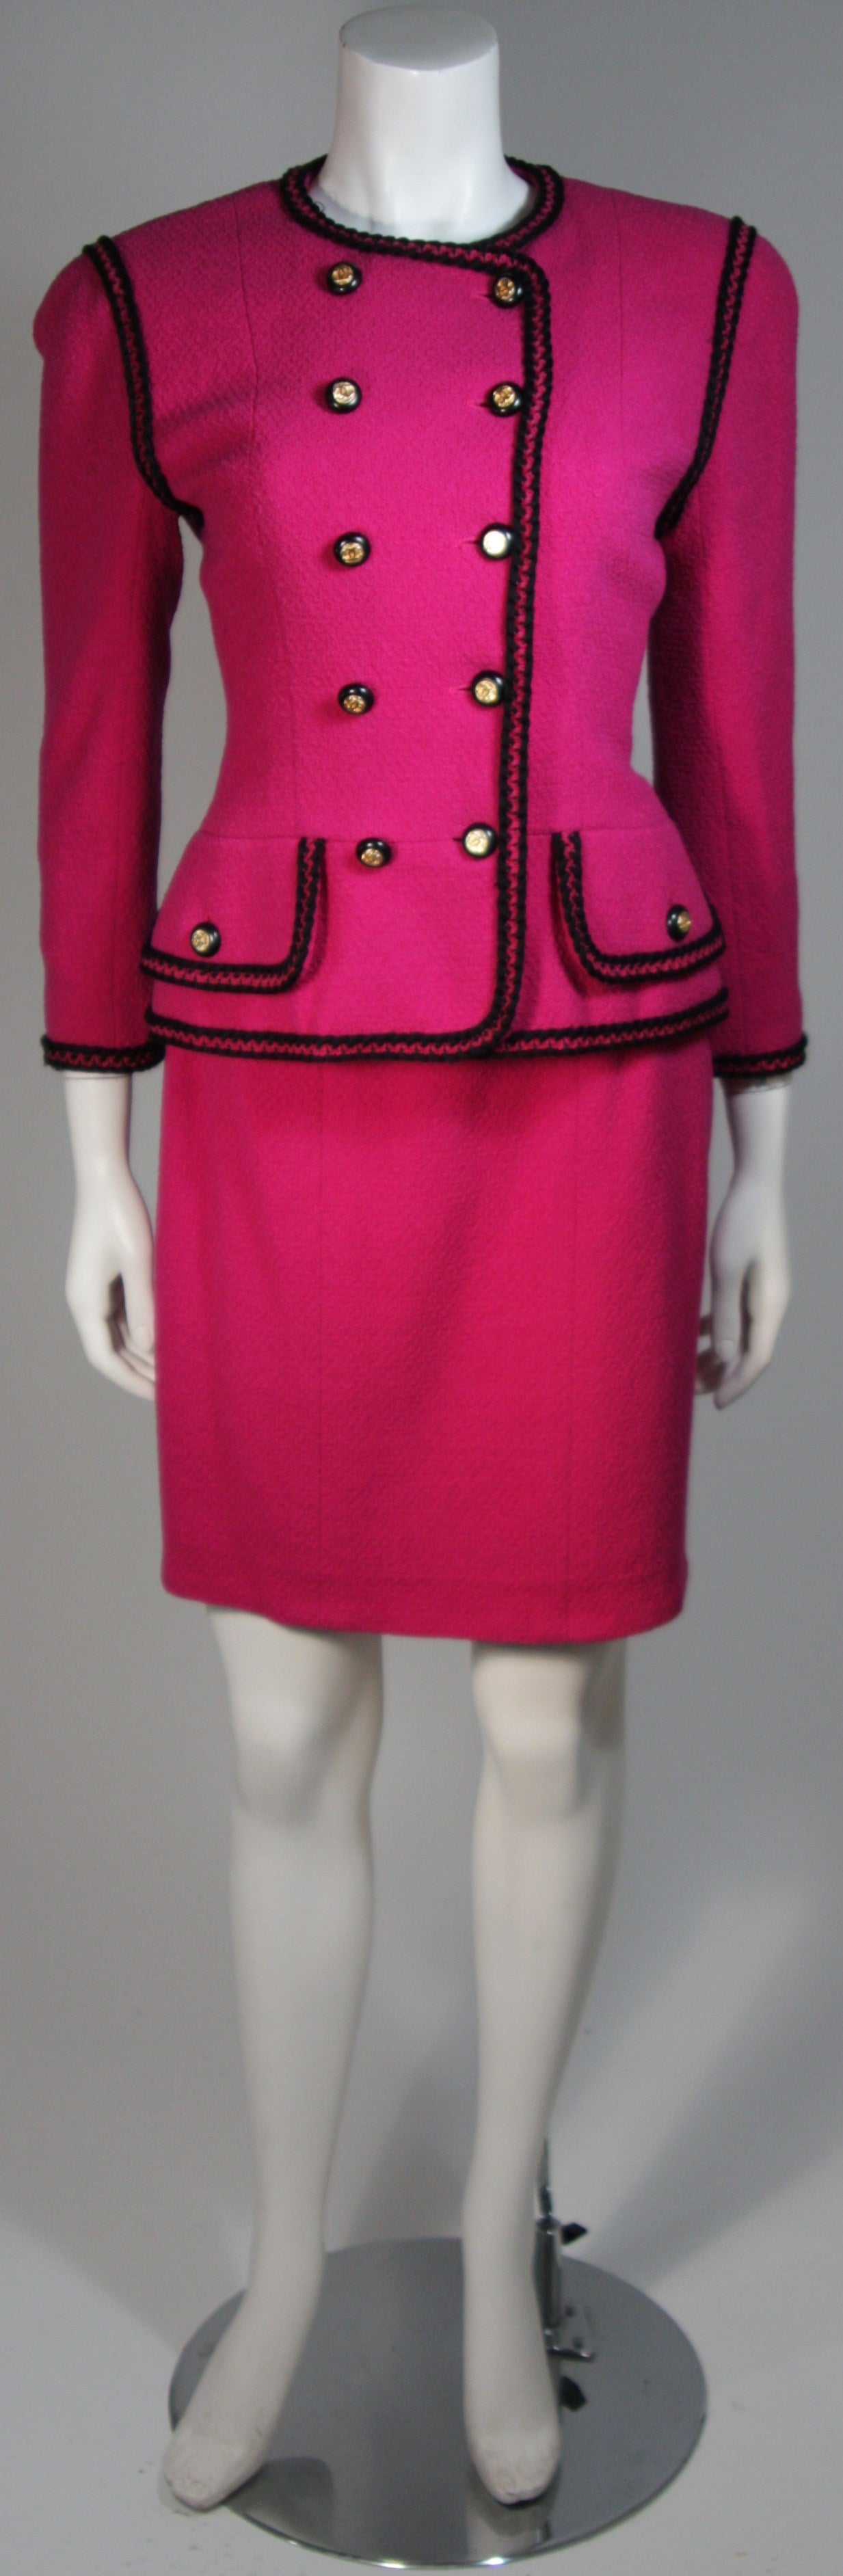 This Chanel iconic fuchsia and black jacket and skirt set by Chanel, from the 1980's. The jacket is double breasted with gold and black logo buttons on the front, pockets, and cuffs.

Please review the measurements provided below to ensure a